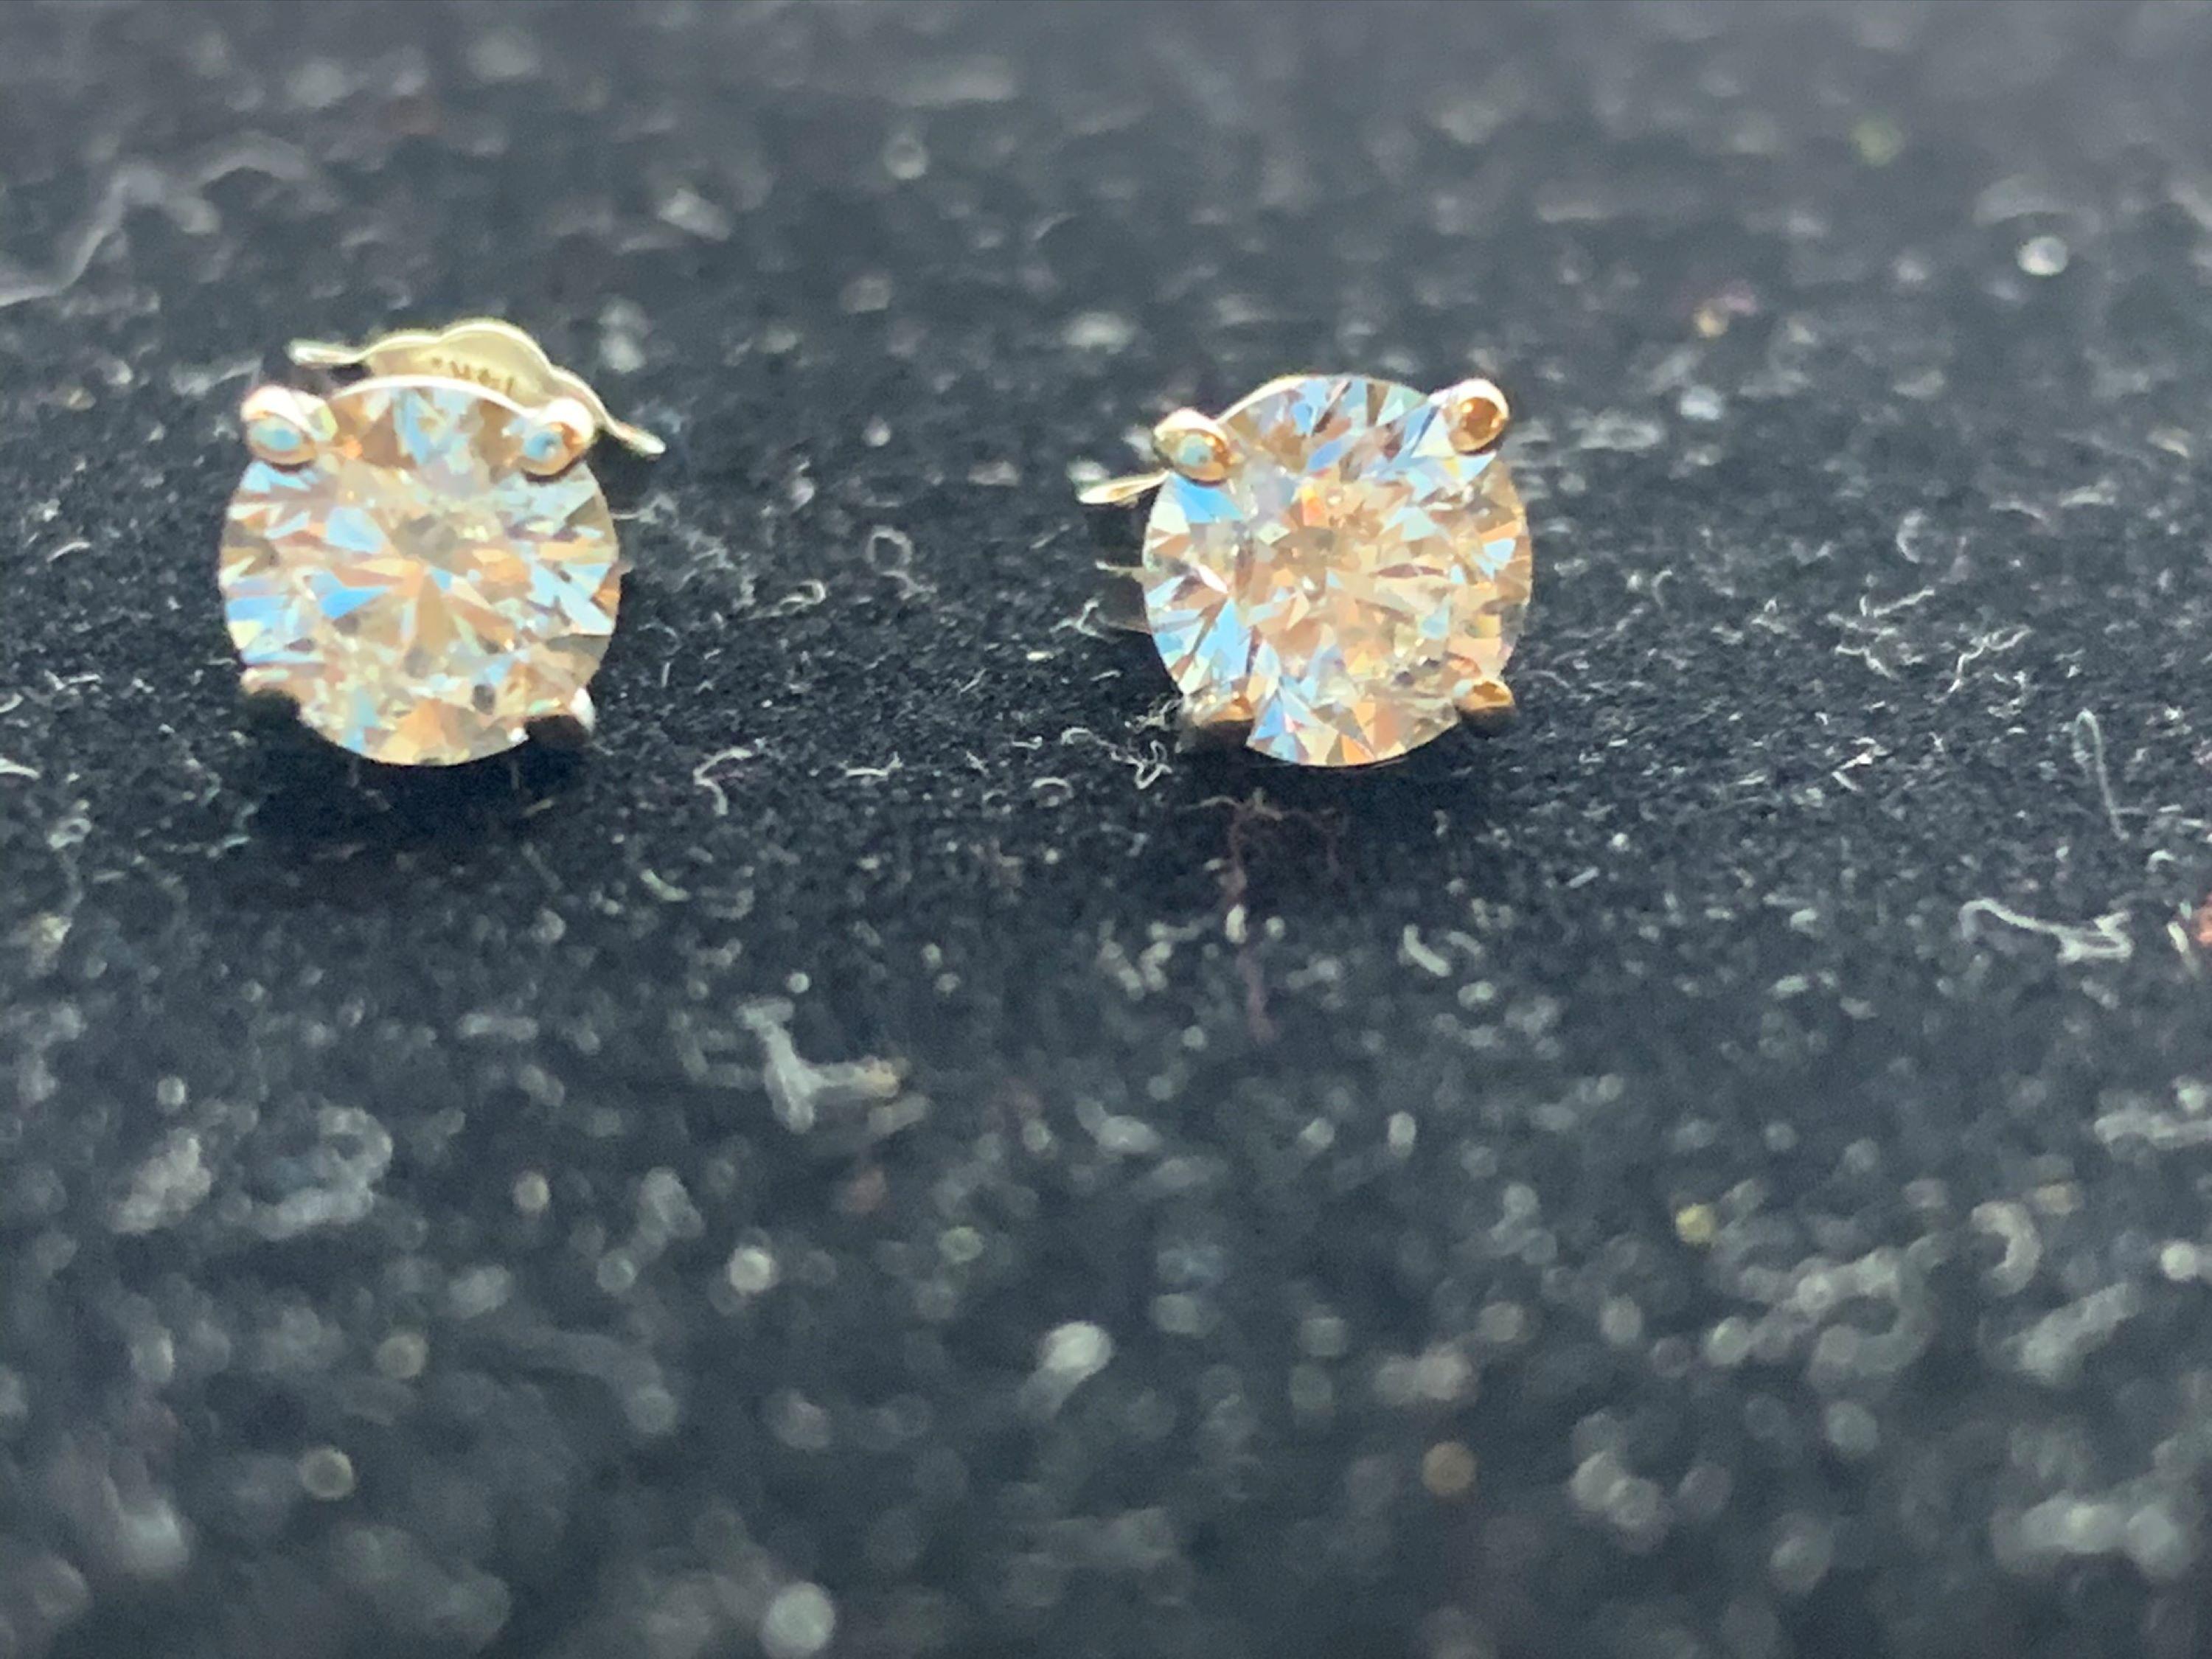 14k white gold studs, each with a diamond solitaire, tcw 1.00 carats. Screw backs. 